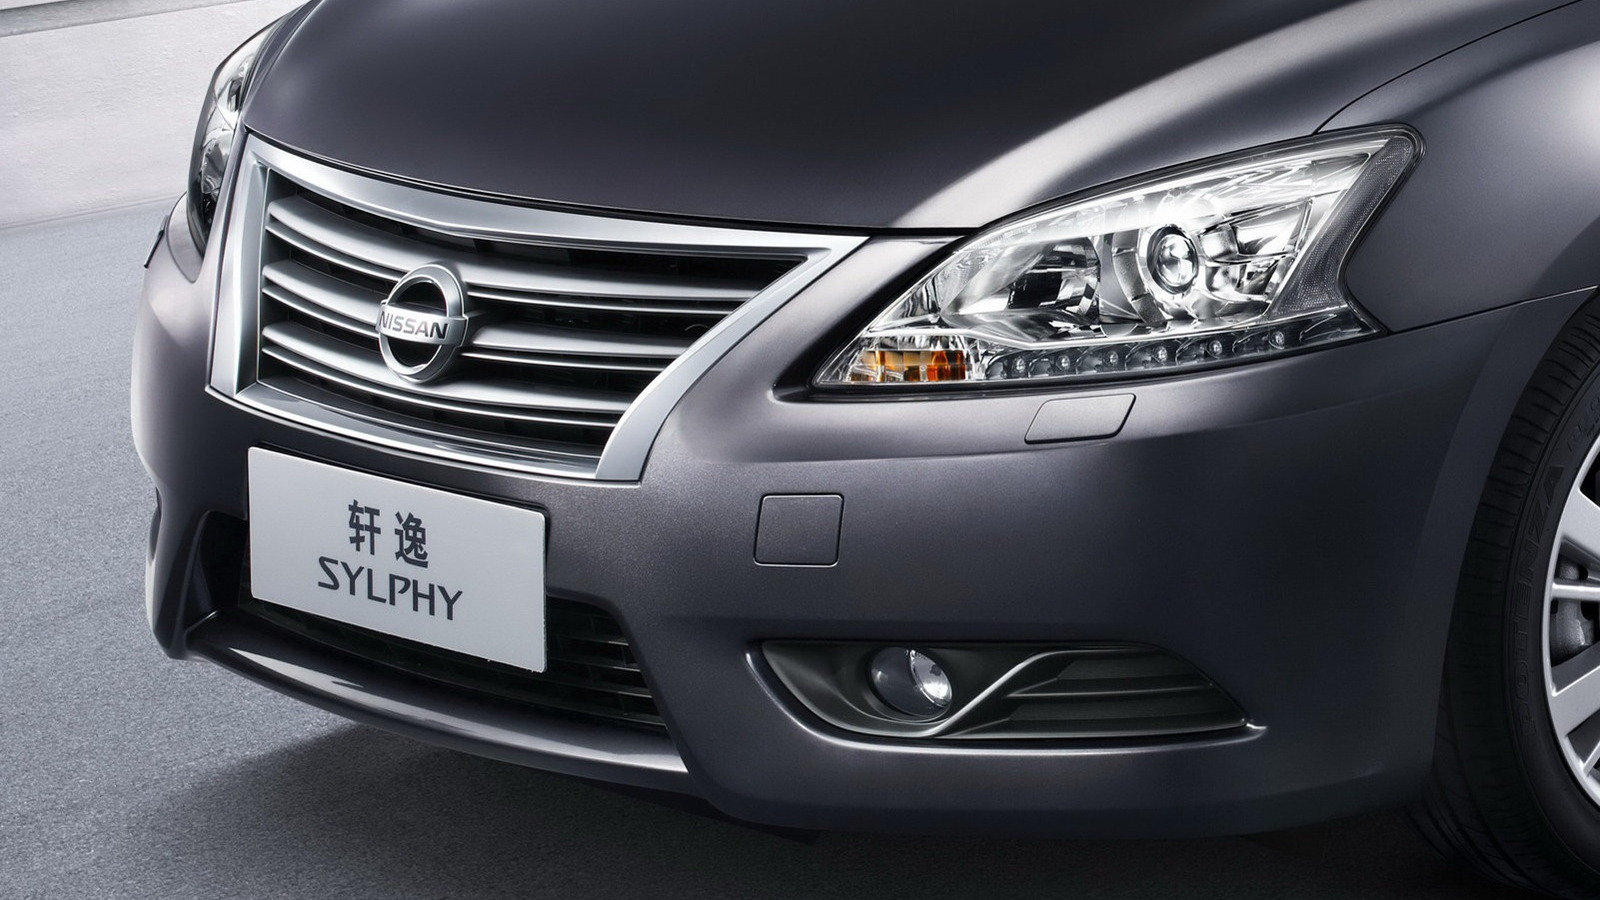 2013 Nissan Sylphy, Beijing Auto Show